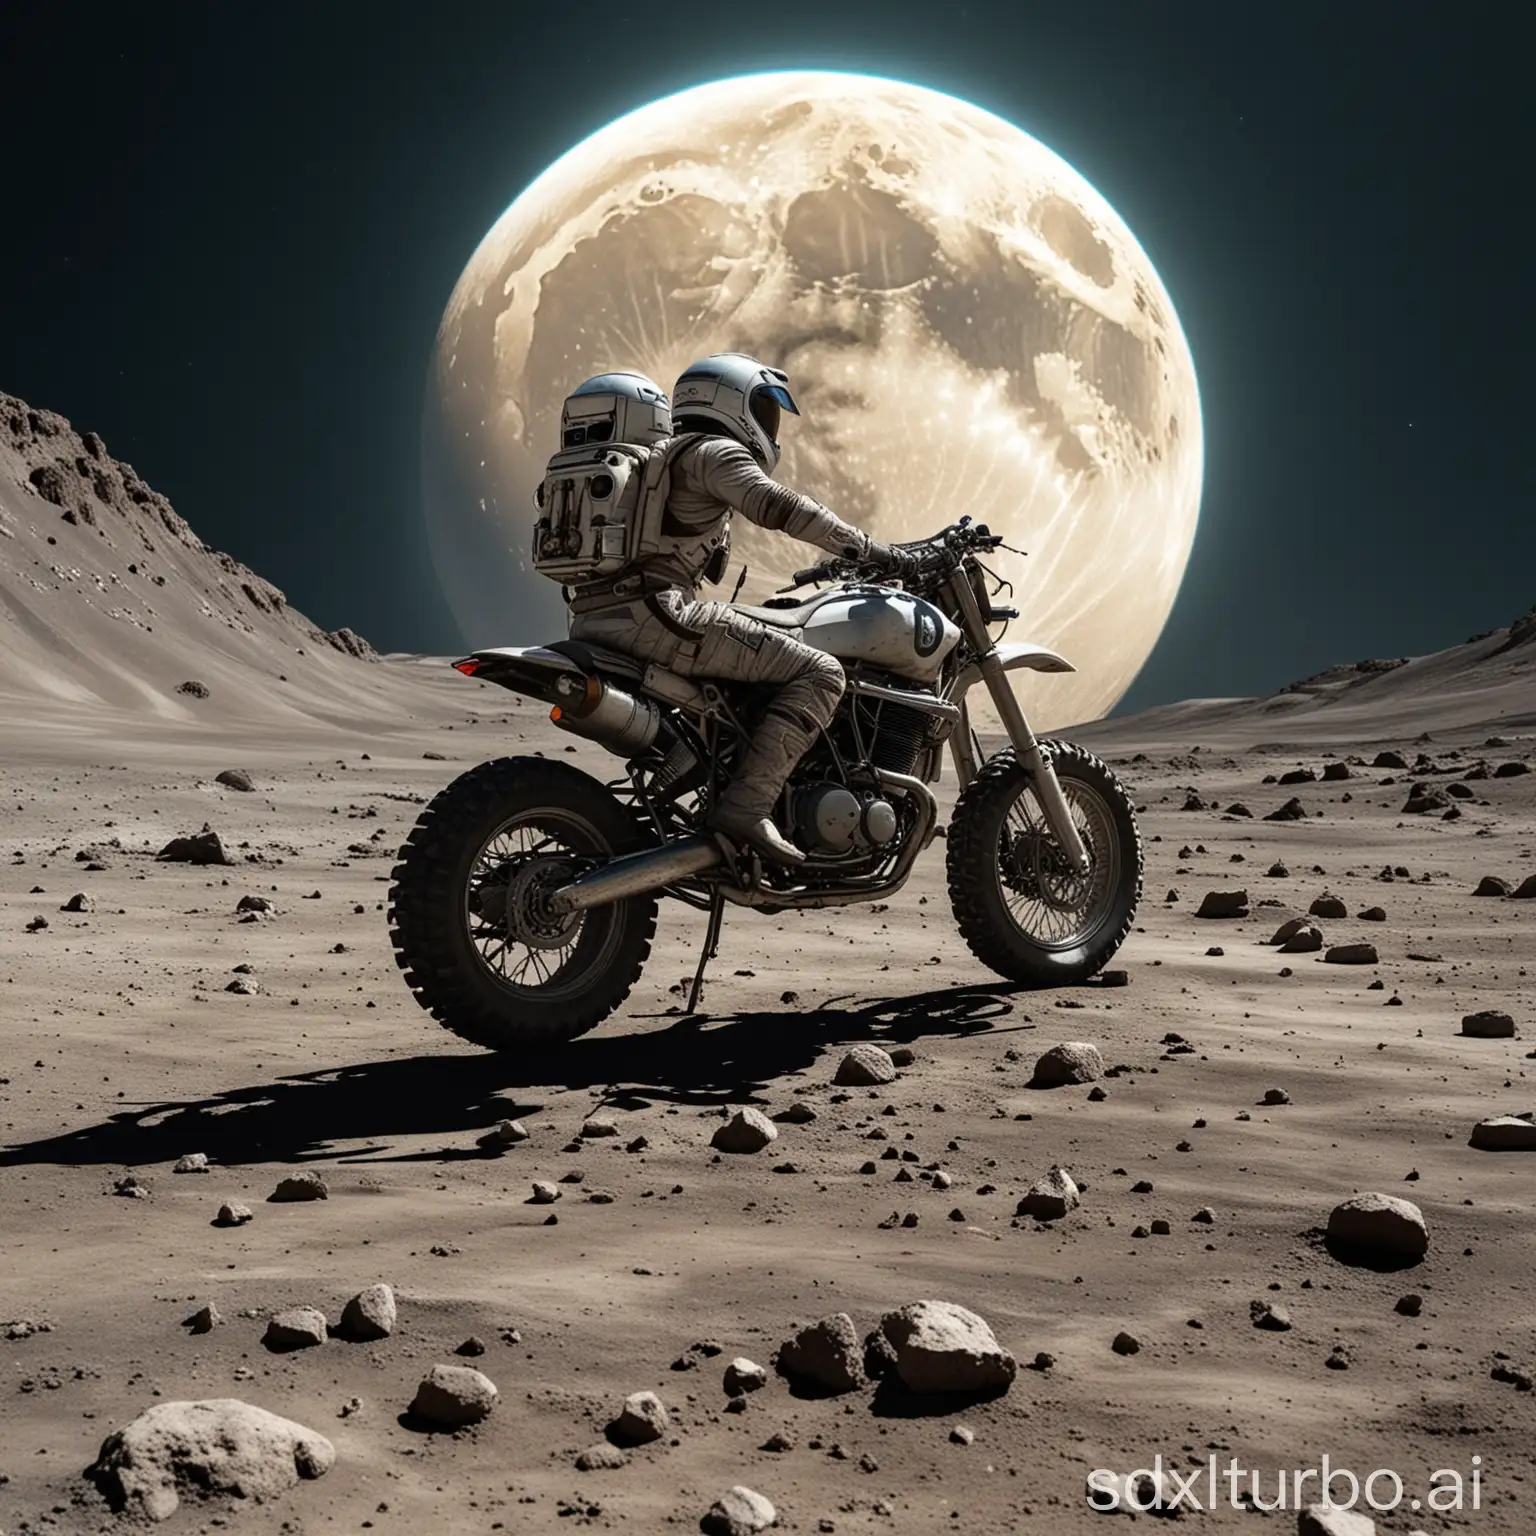 a cool motorcycle on the moon